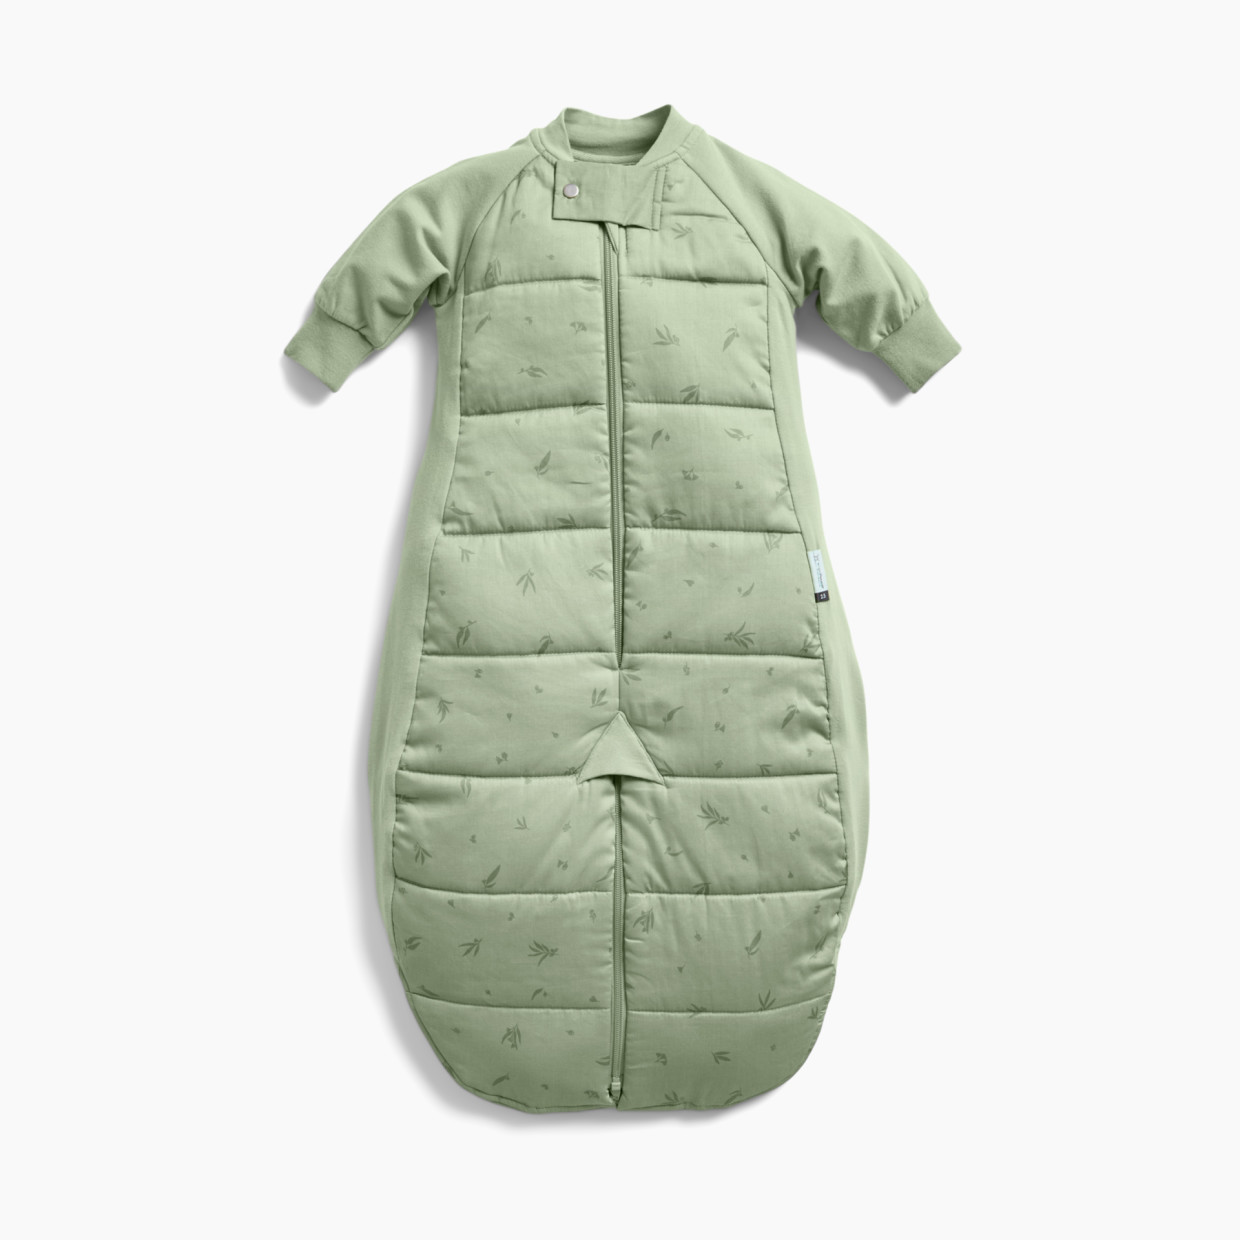 ergoPouch Sleep Suit Bag 2.5 Tog - Willow, 8-24 Months.